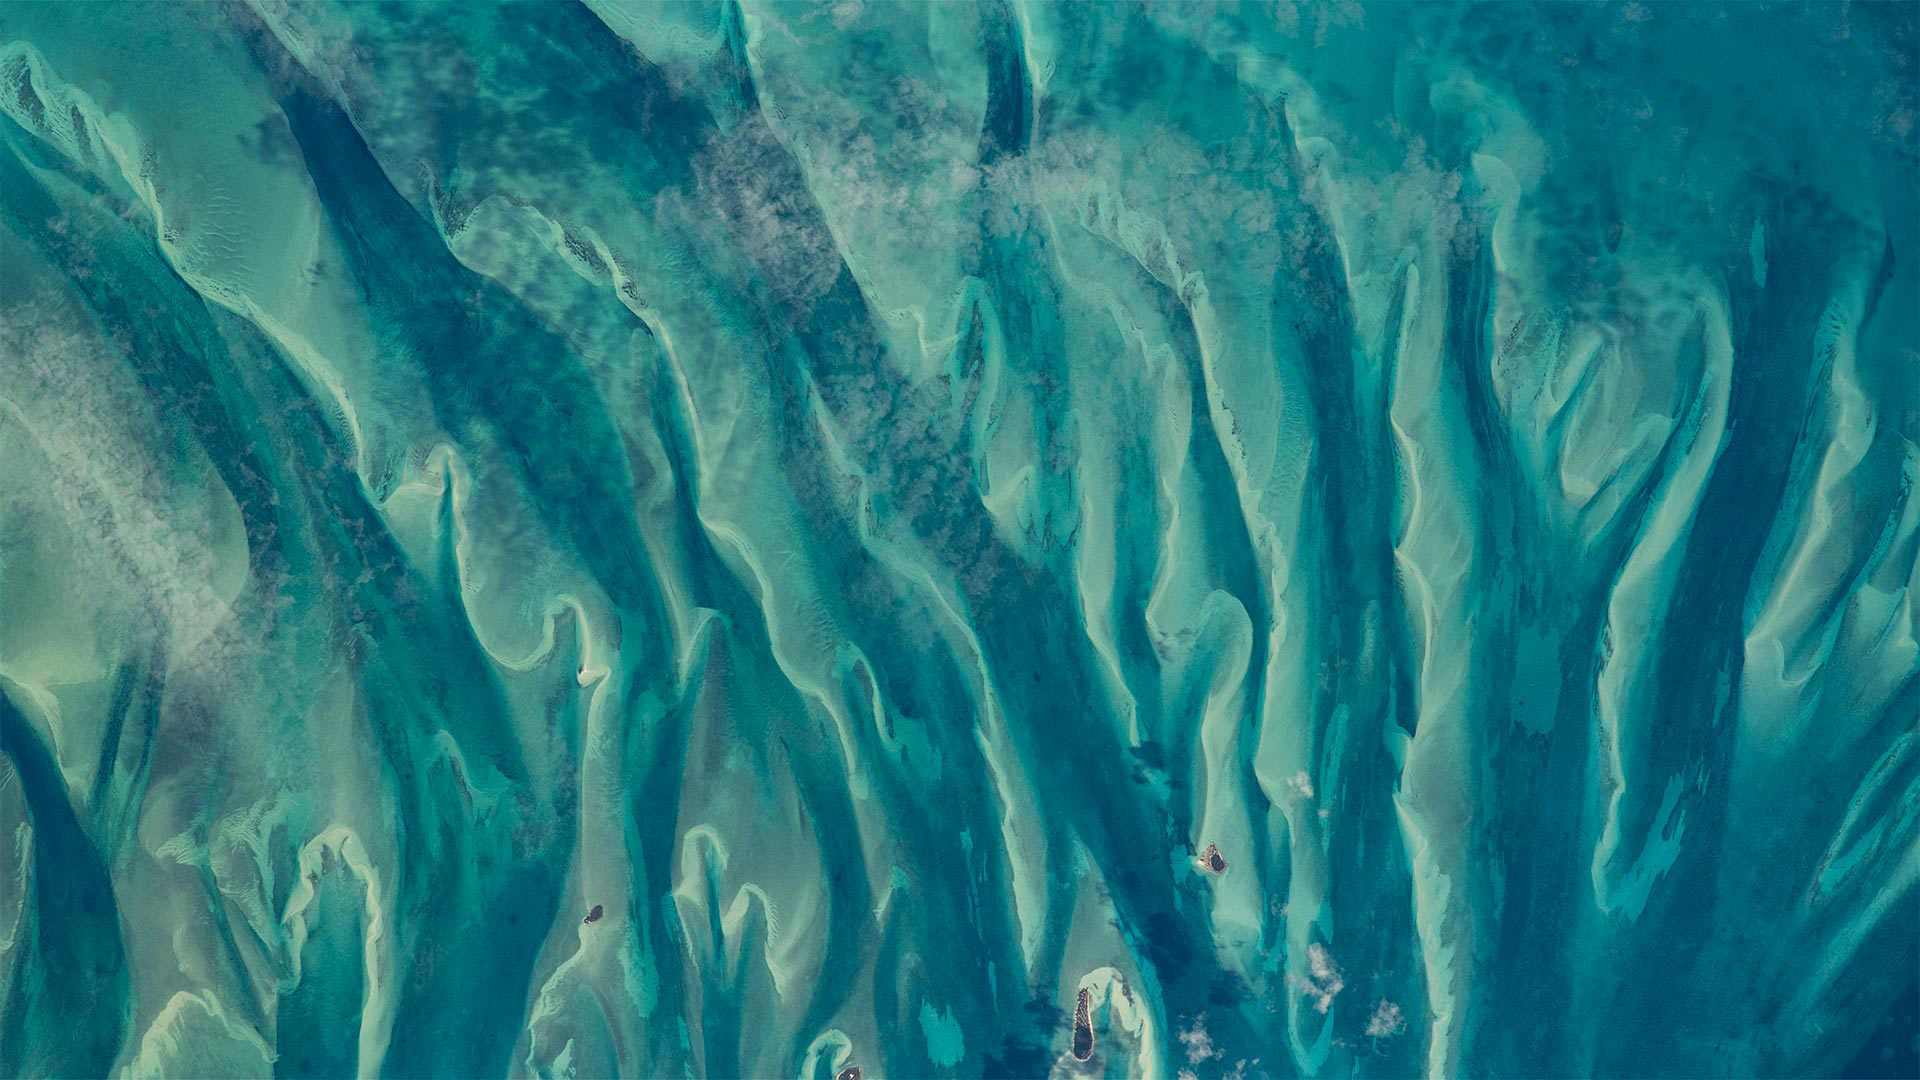 Blue-green waters around the Bahamas as seen from the International Space Station - NASA)